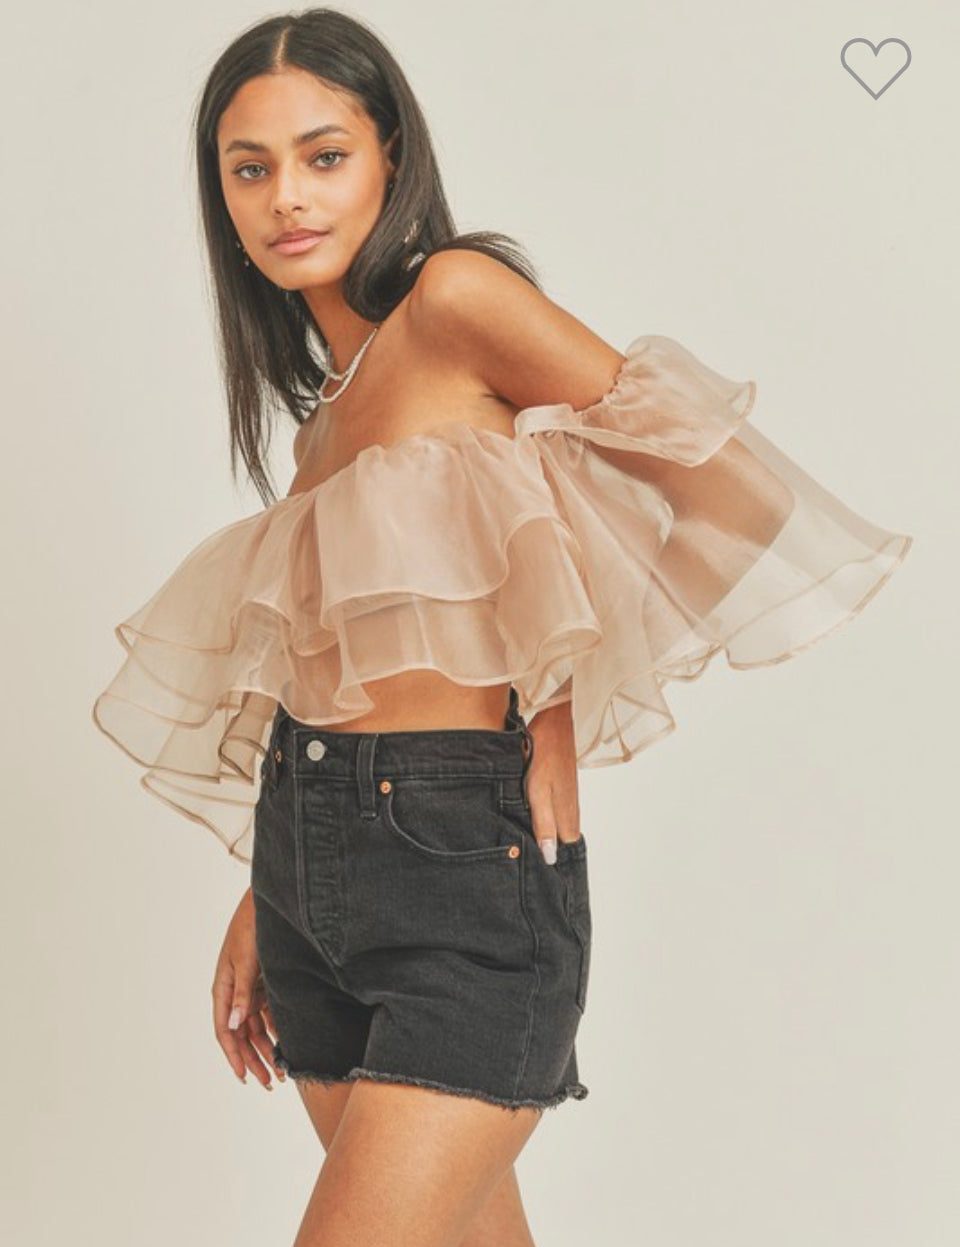 "All Ruffled Up" Top